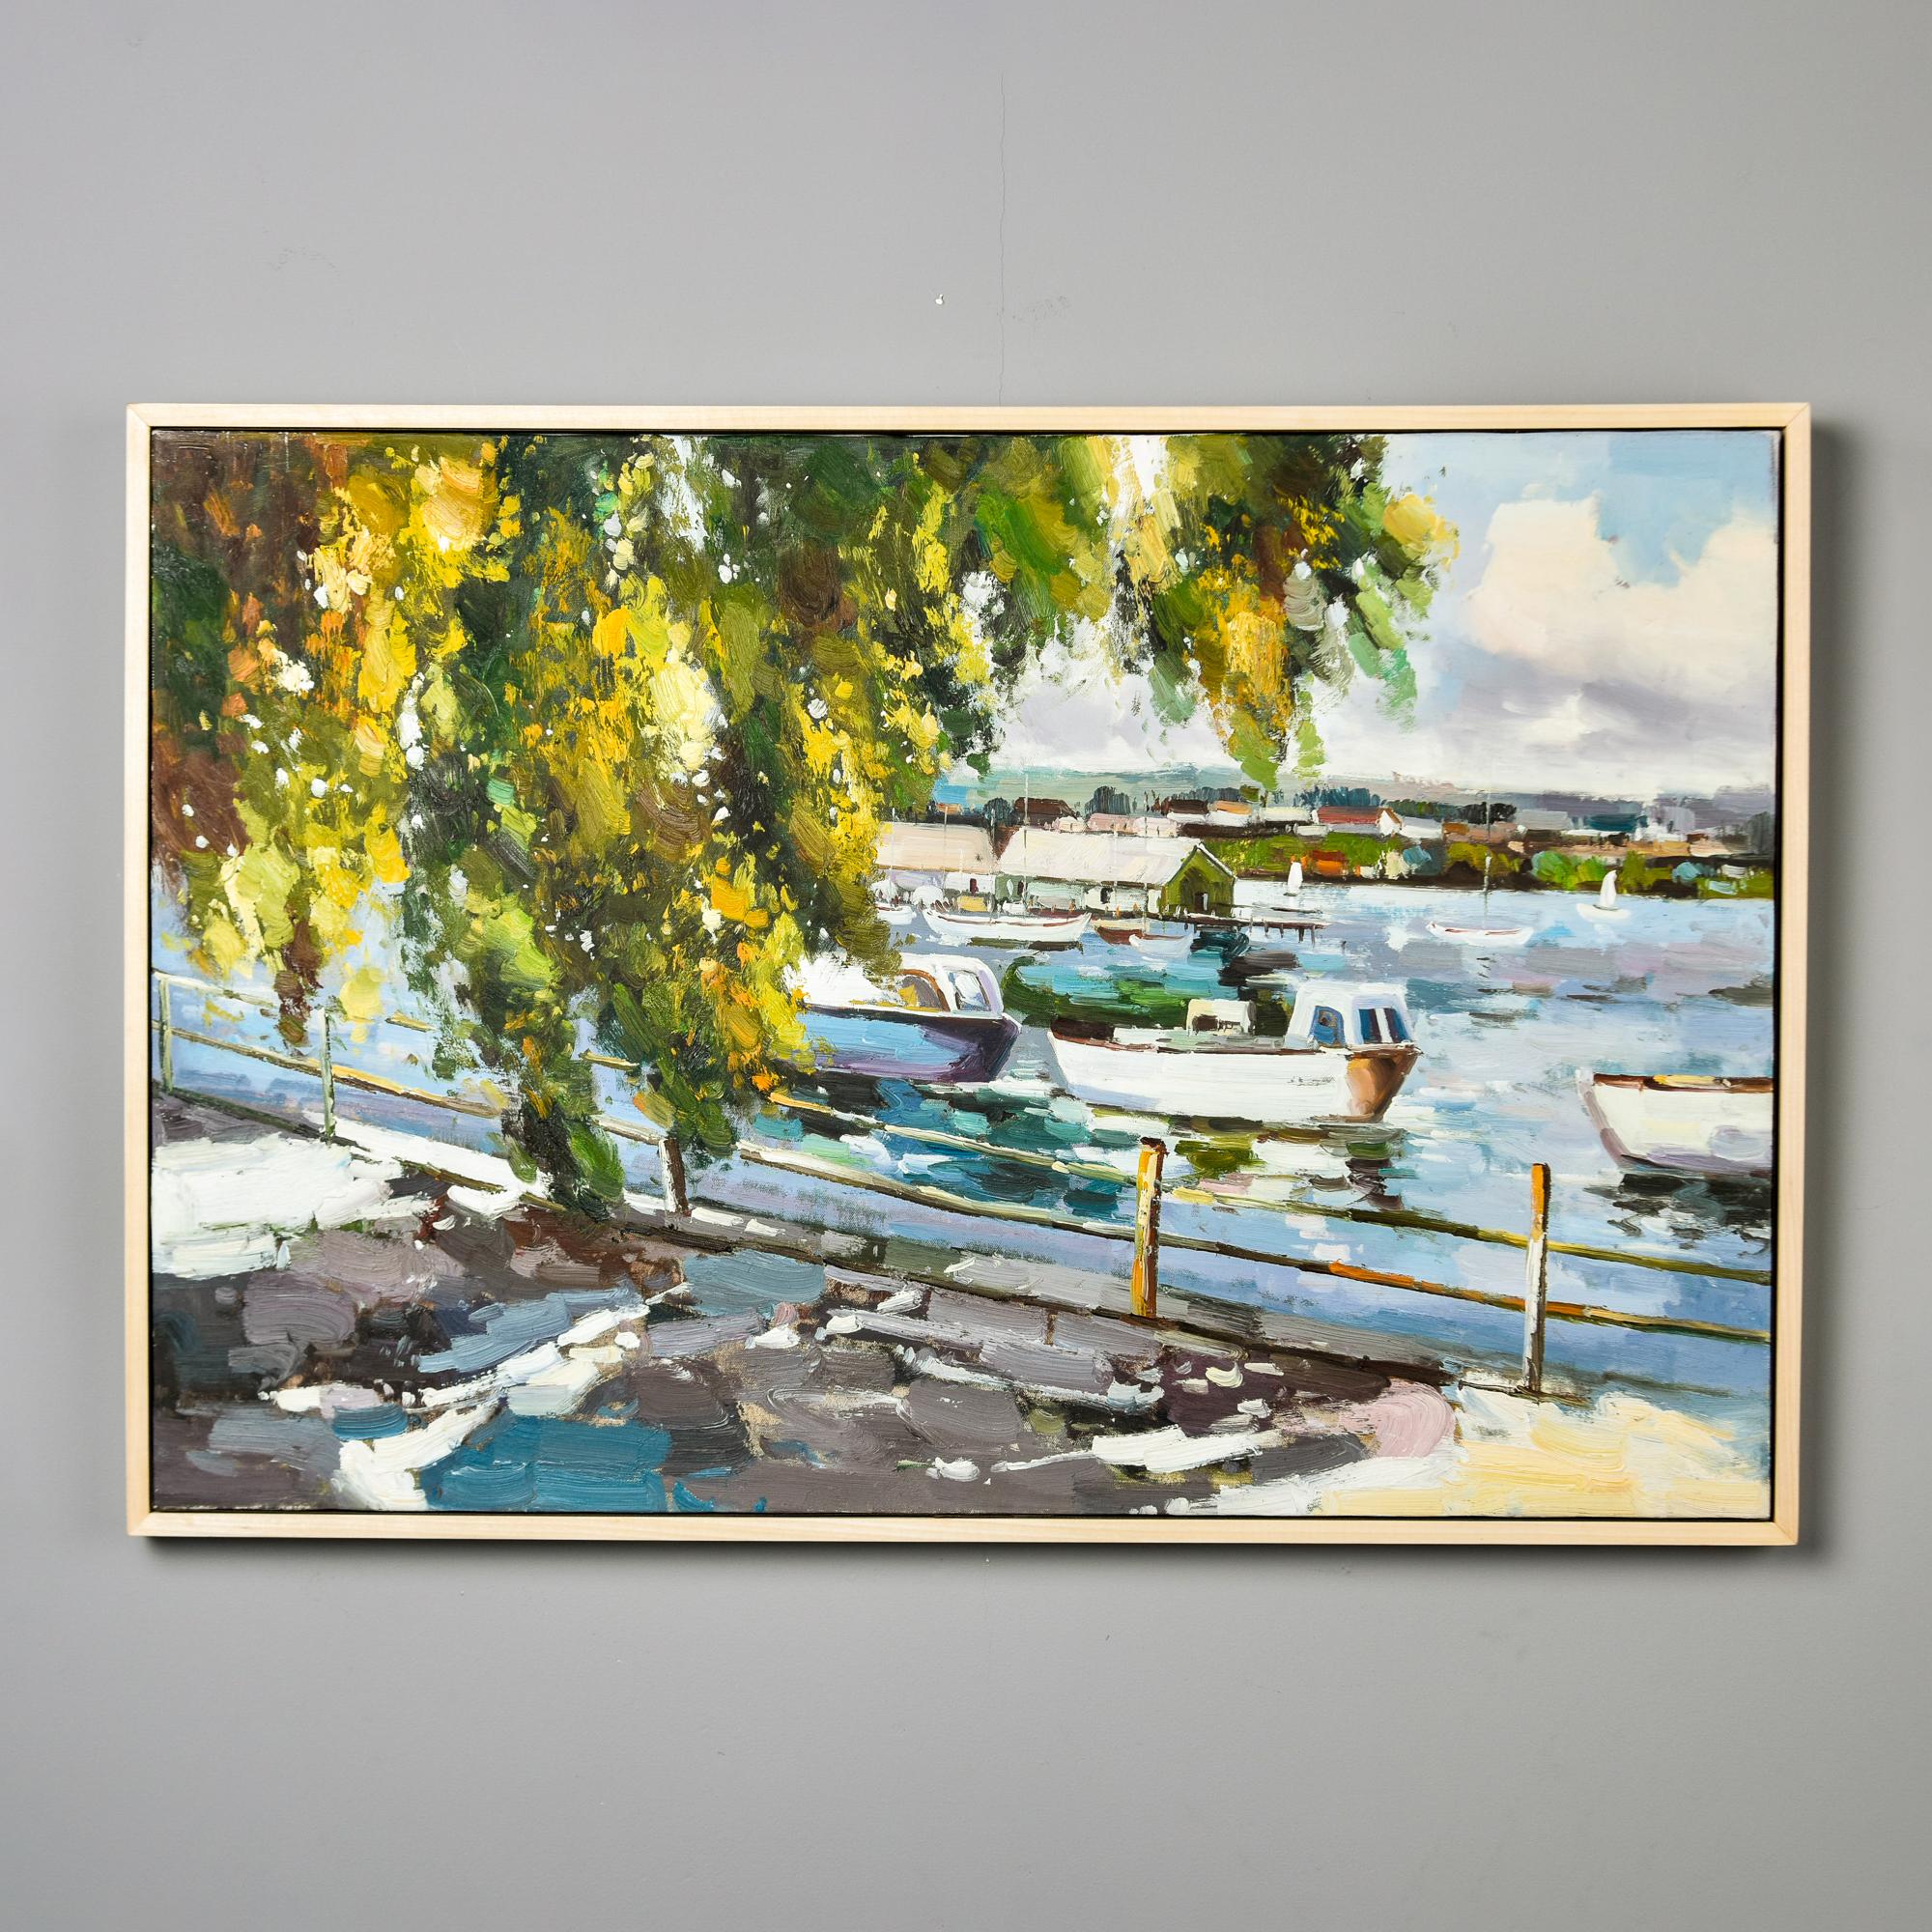 Found on the East Coast in the United States, this large original oil painting on stretched canvas depicting boats in a harbor. Unsigned and new floating frame in pale wood. Unknown artist. 

We may be able to send this via parcel service depending